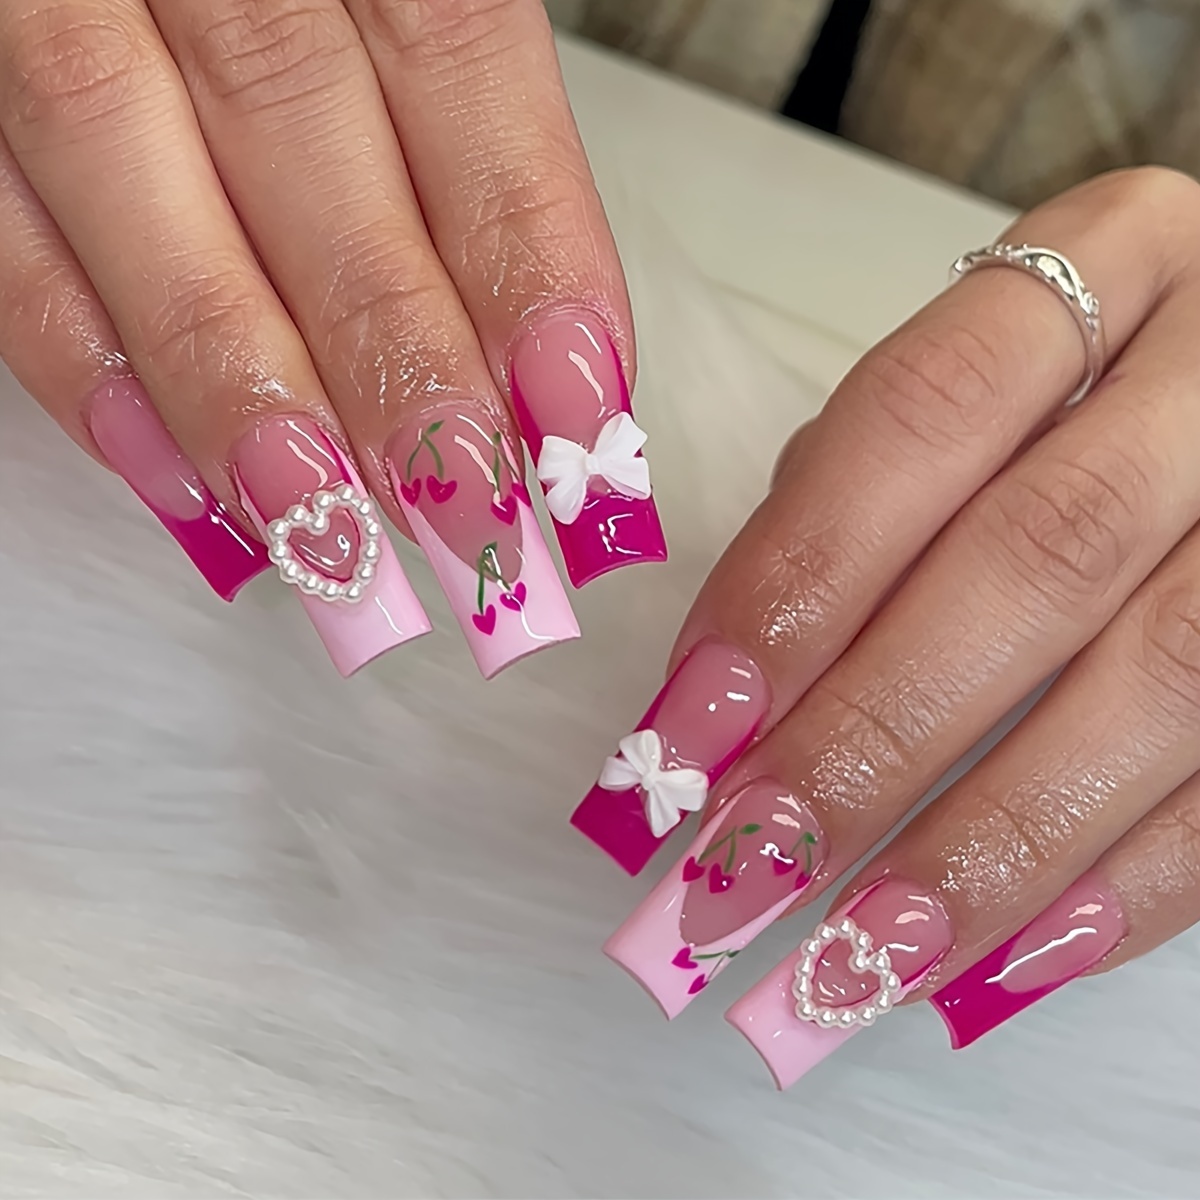 

24pcs Long Square Glossy Press-on Nails With Pink French Tips, 3d Pearl Hearts & Cherry Design - Acrylic False Nails Set For Women And Girls